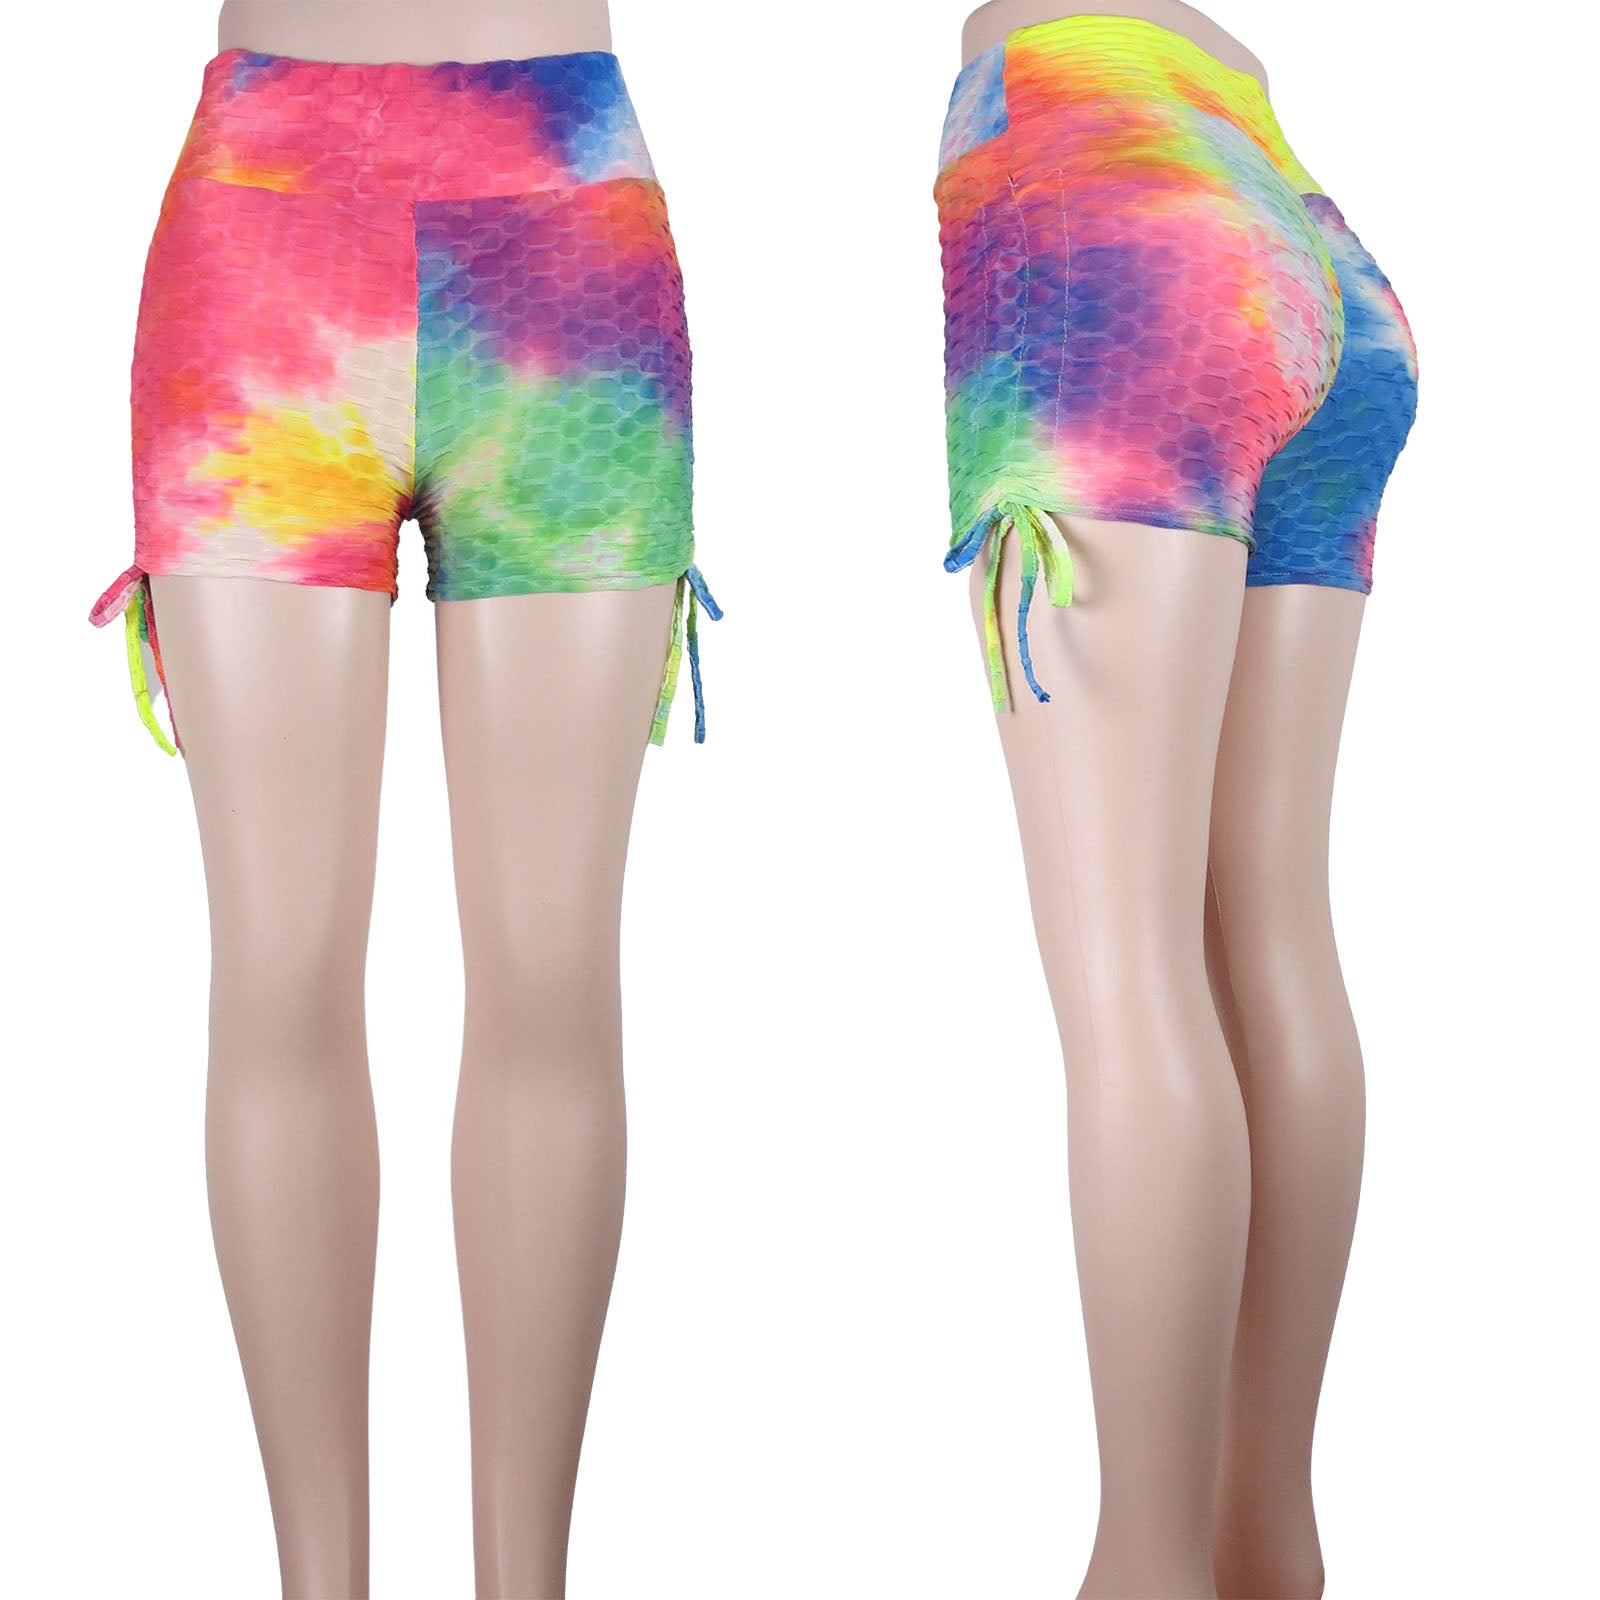 wholesale tie dye booty shorts tiktok bubble pattern with high waist in rainbow color blend